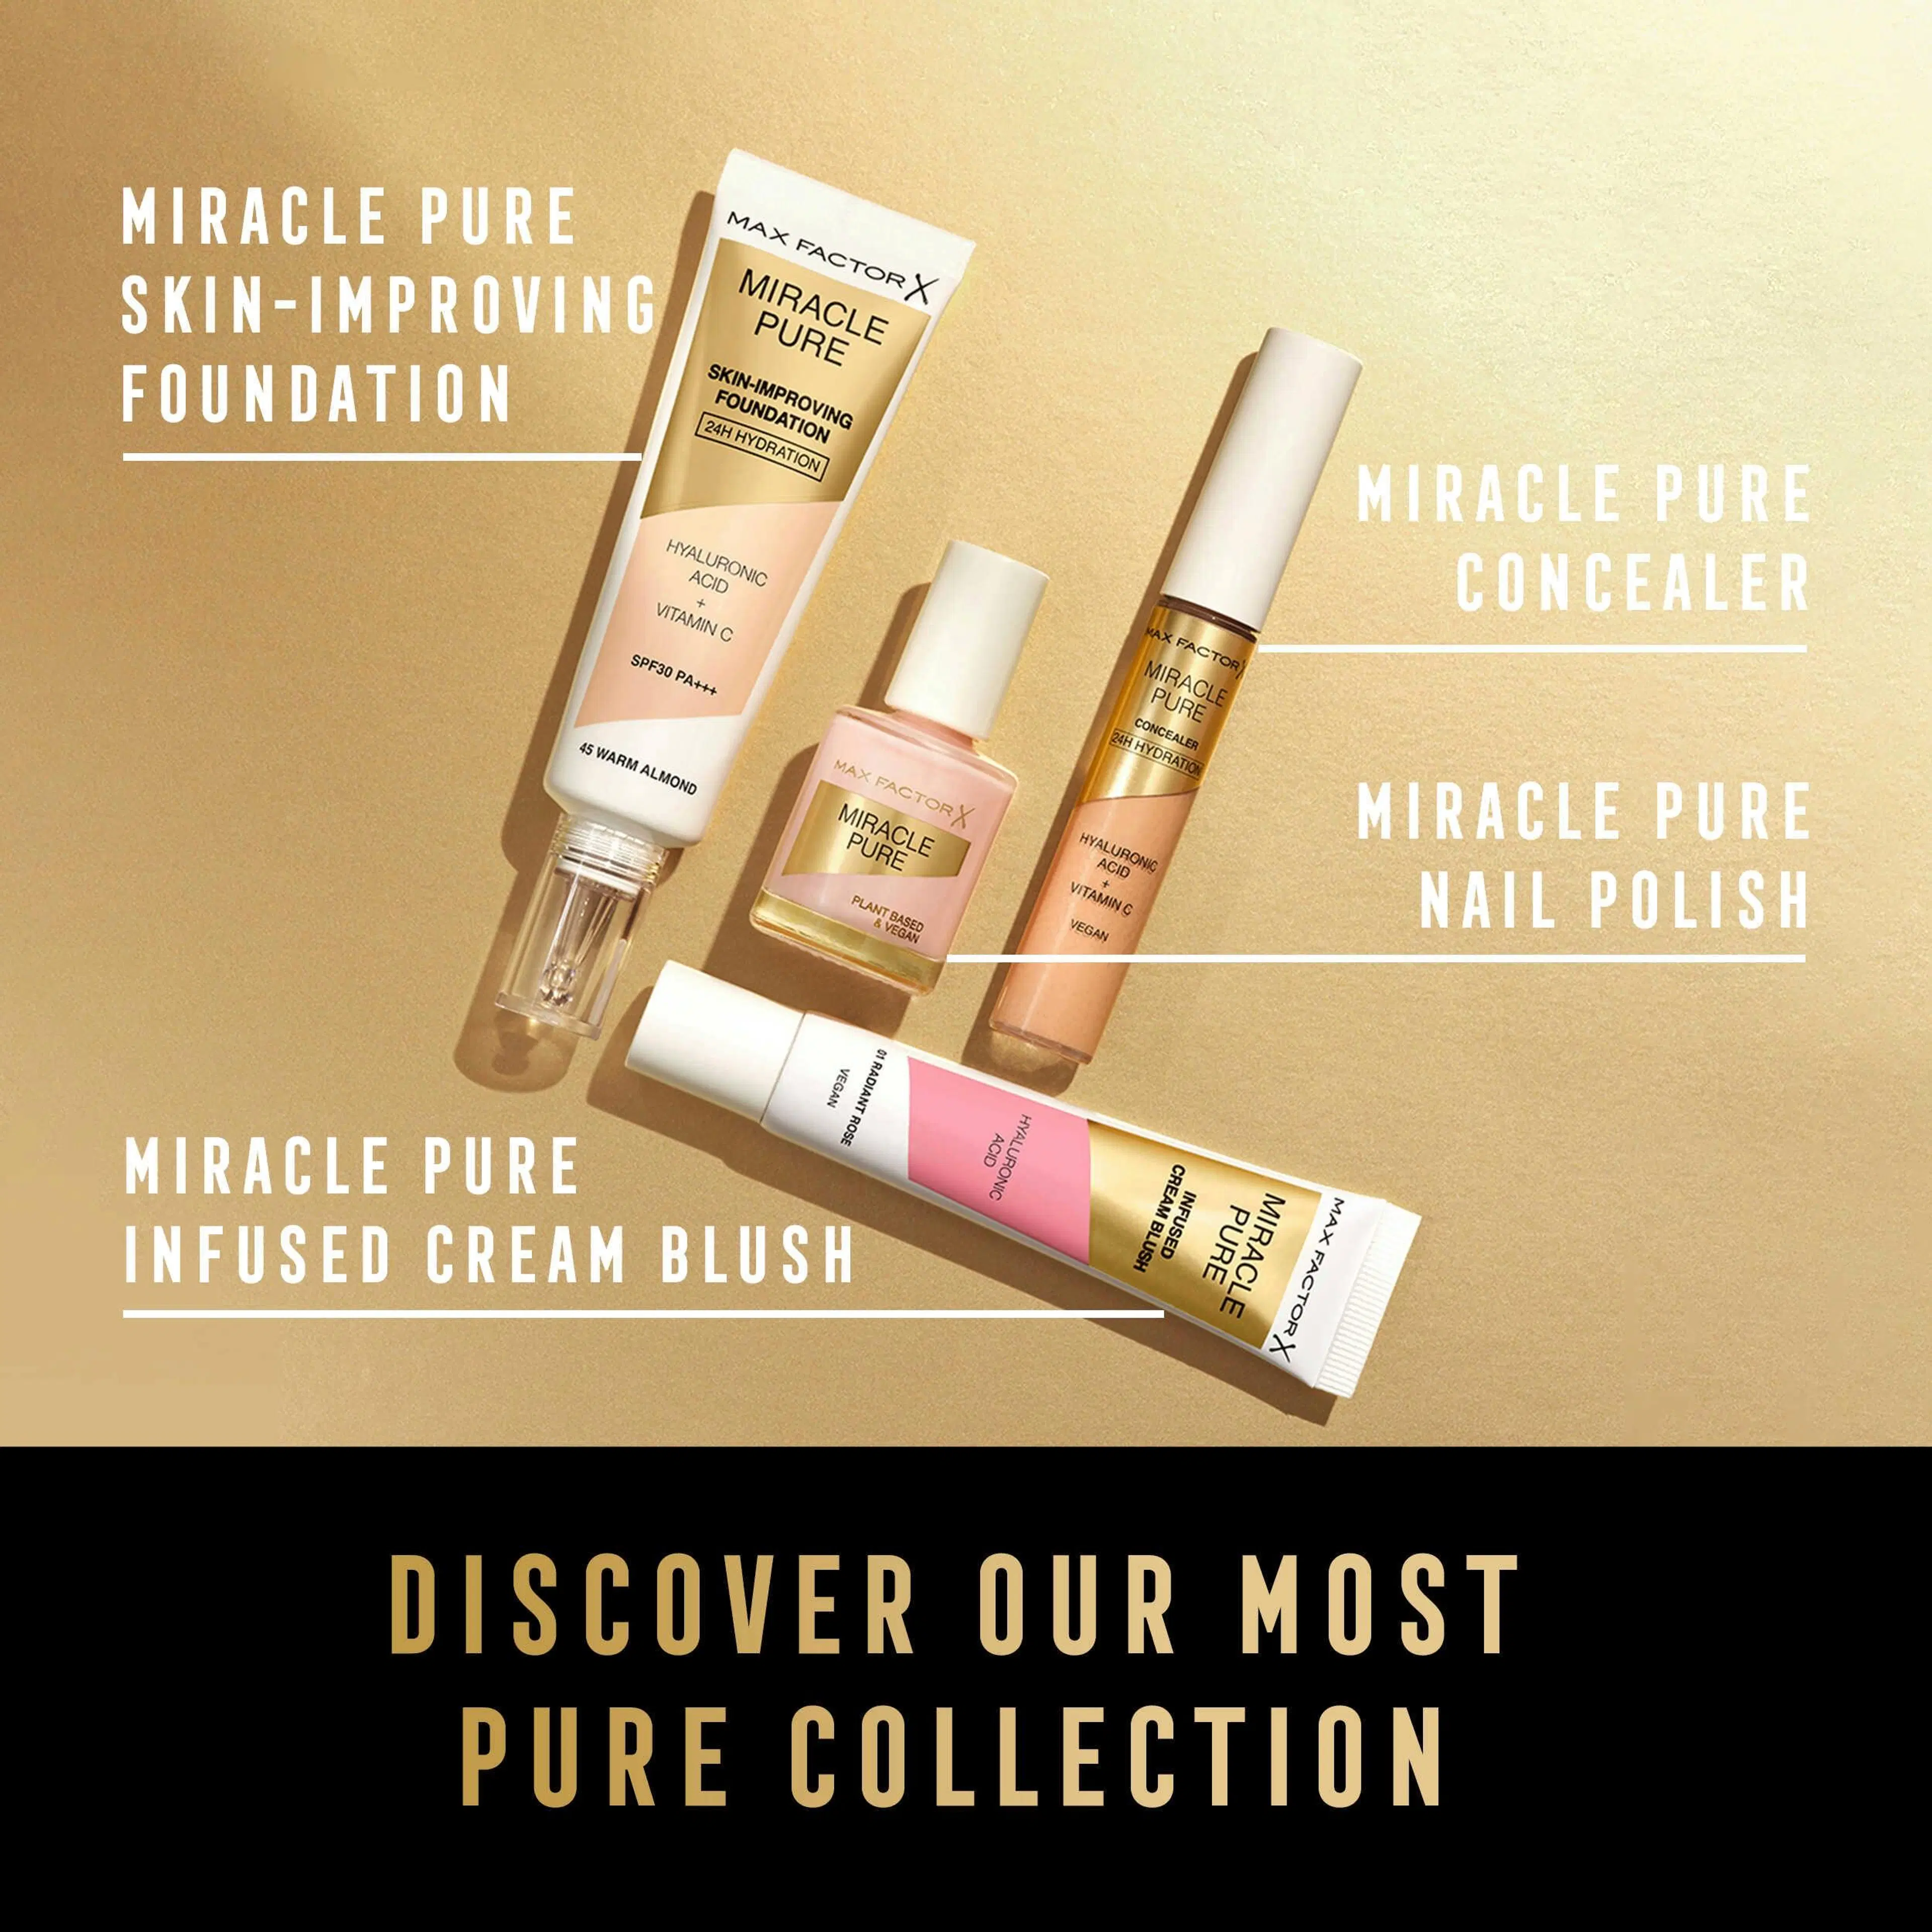 Max Factor Miracle Pure Foundation 50 Natural Rose 30 ml